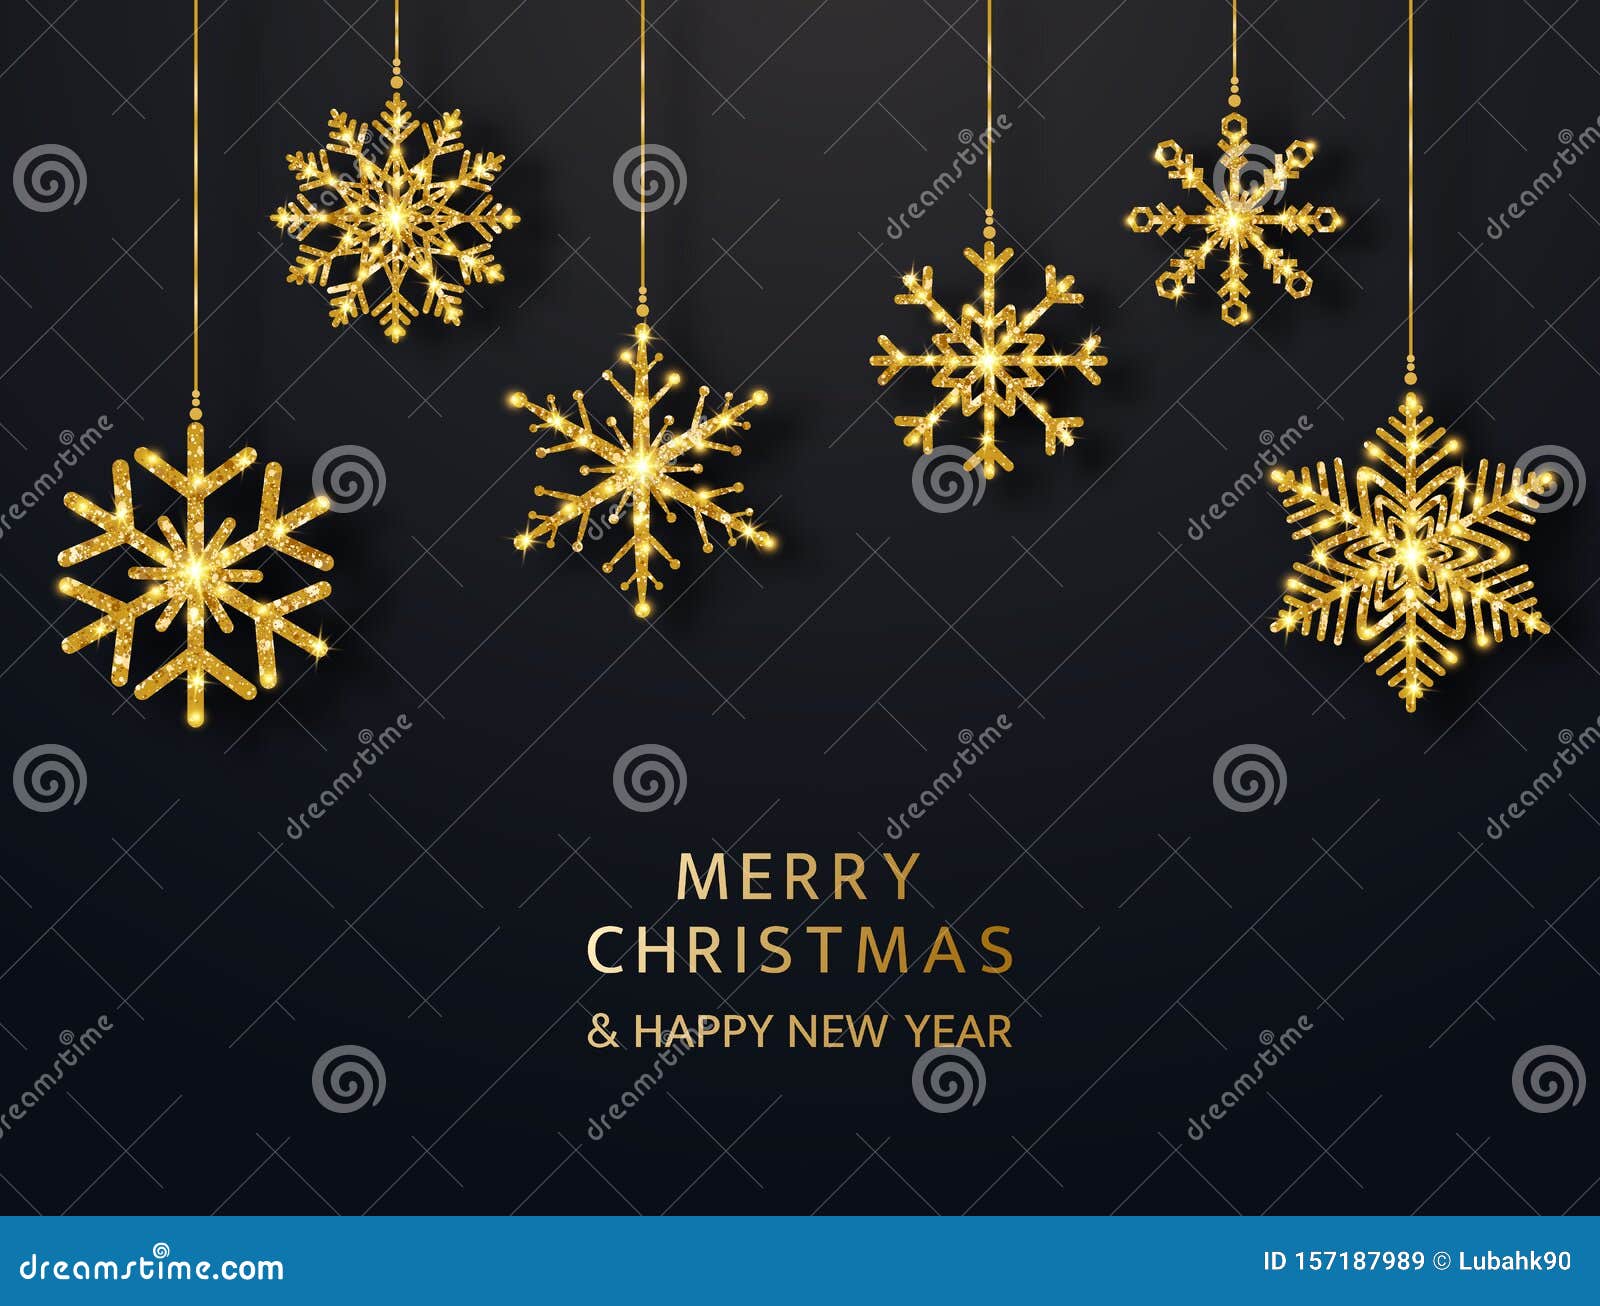 merry christmas greeting card with hanging glitter snowflakes. bright gold baubles on black background. luxury holiday